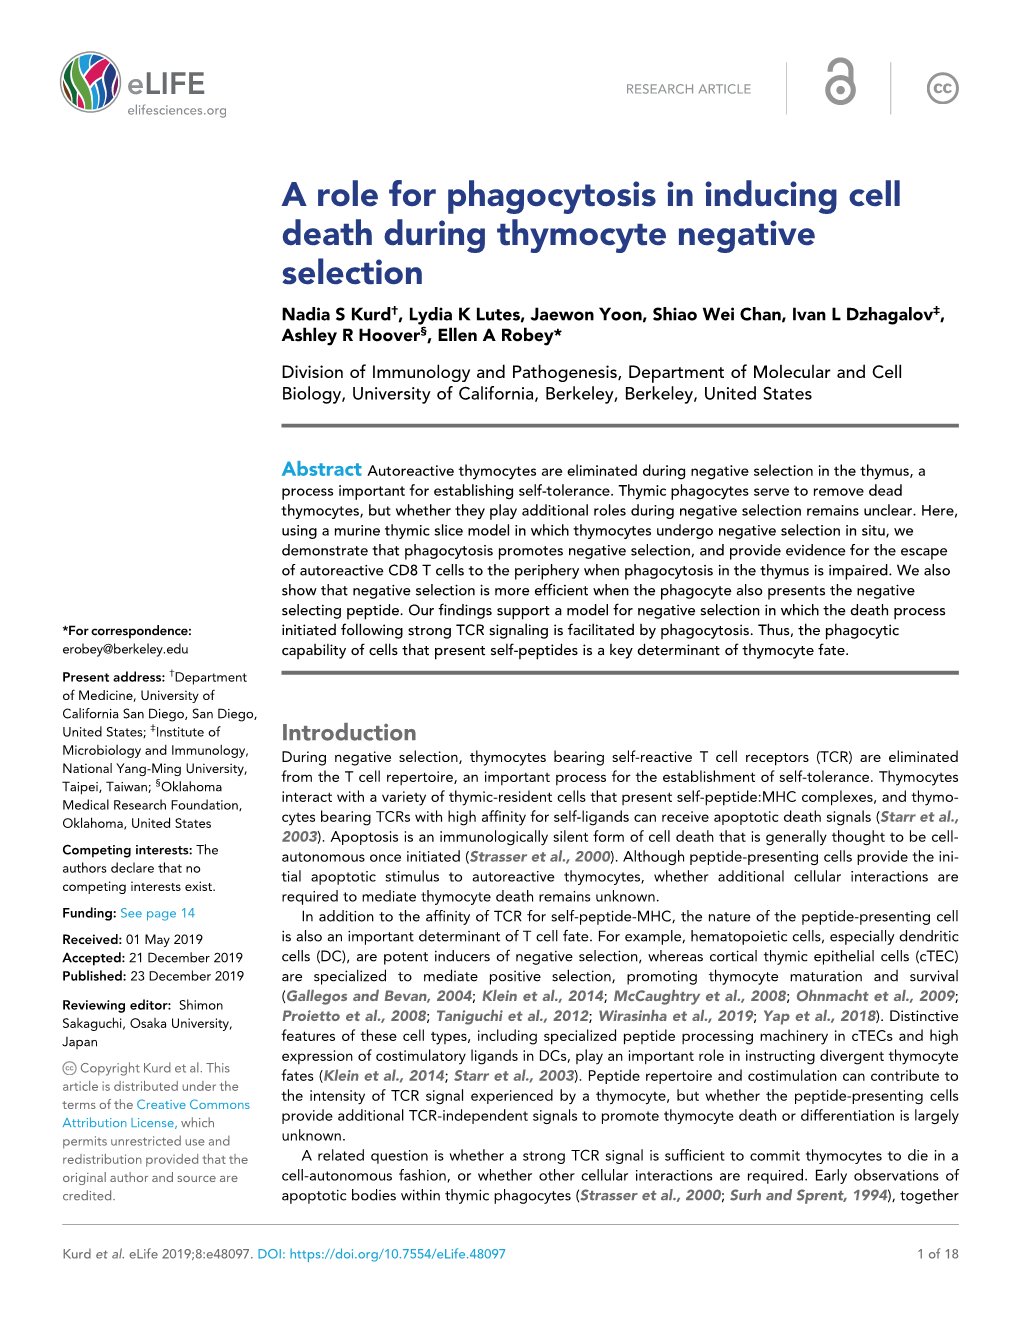 A Role for Phagocytosis in Inducing Cell Death During Thymocyte Negative